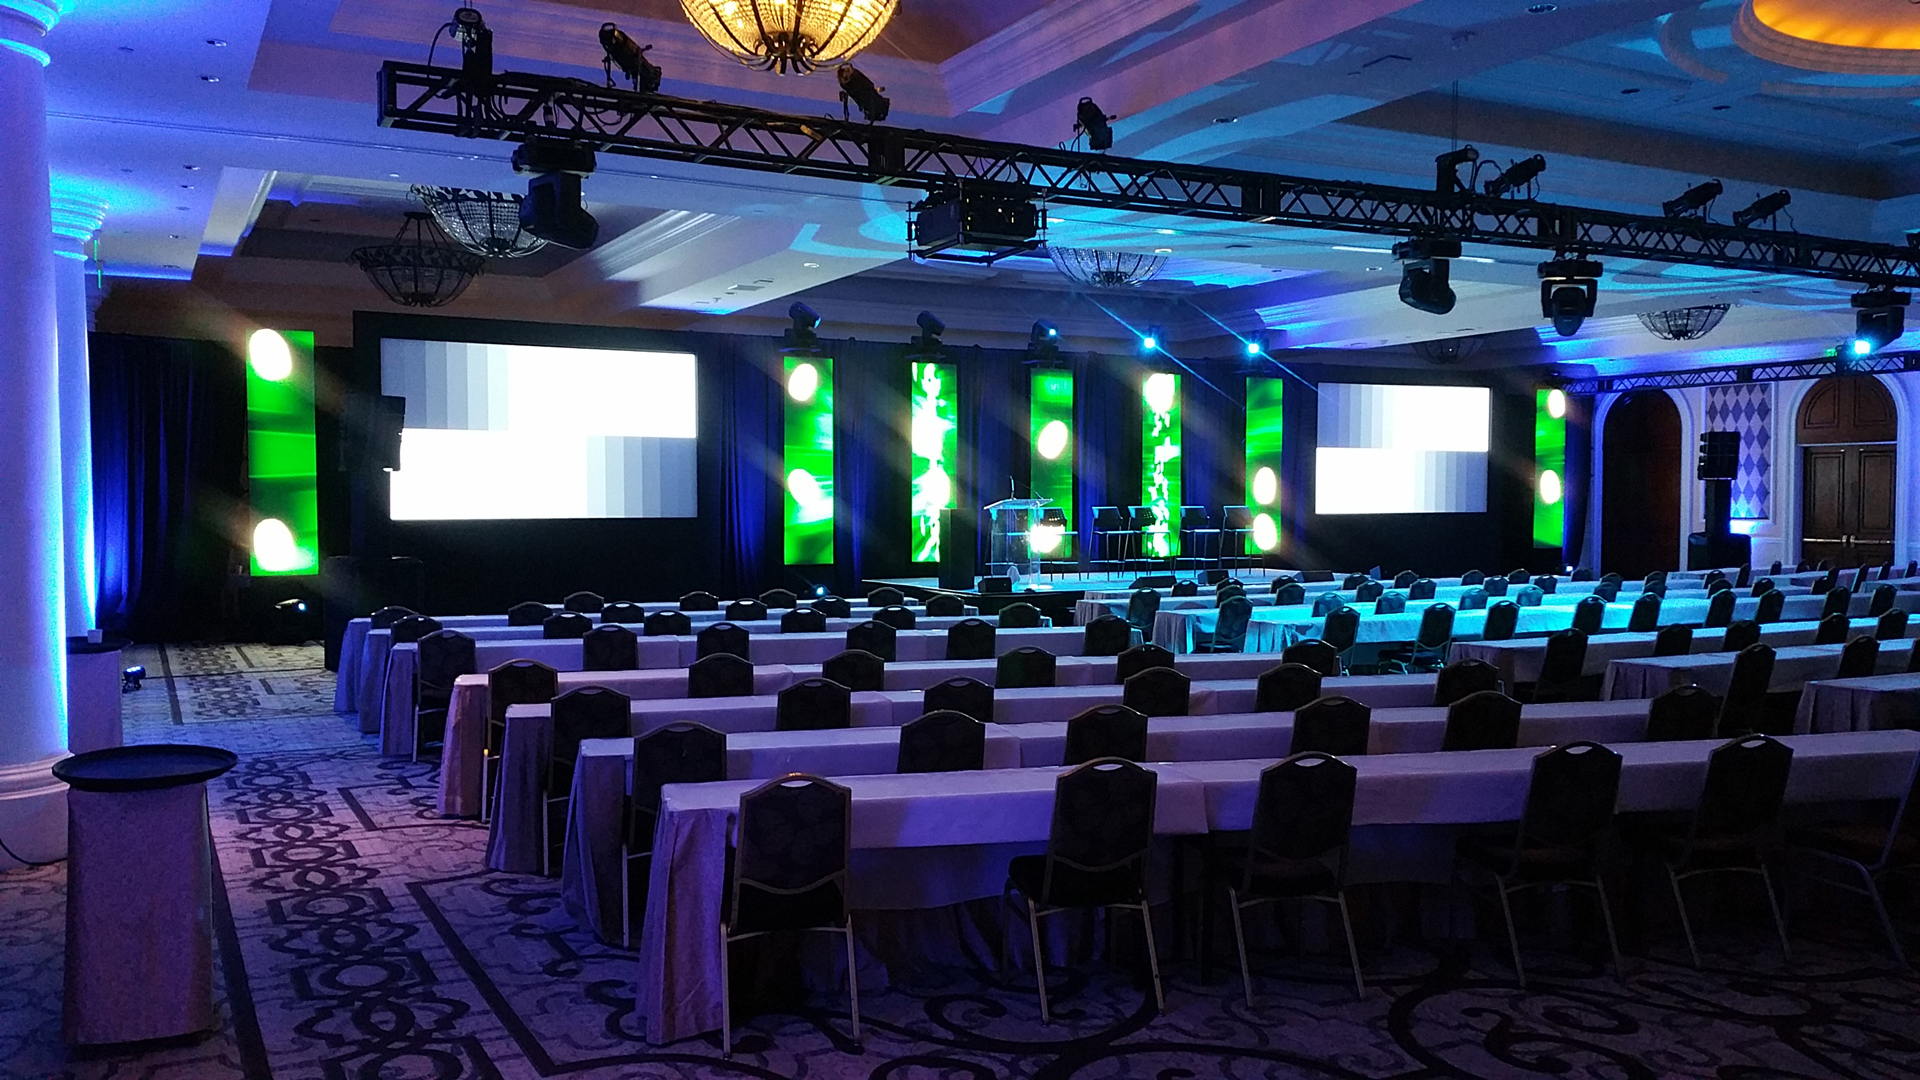 Pulse General Session stage, LED screens,  and video walls